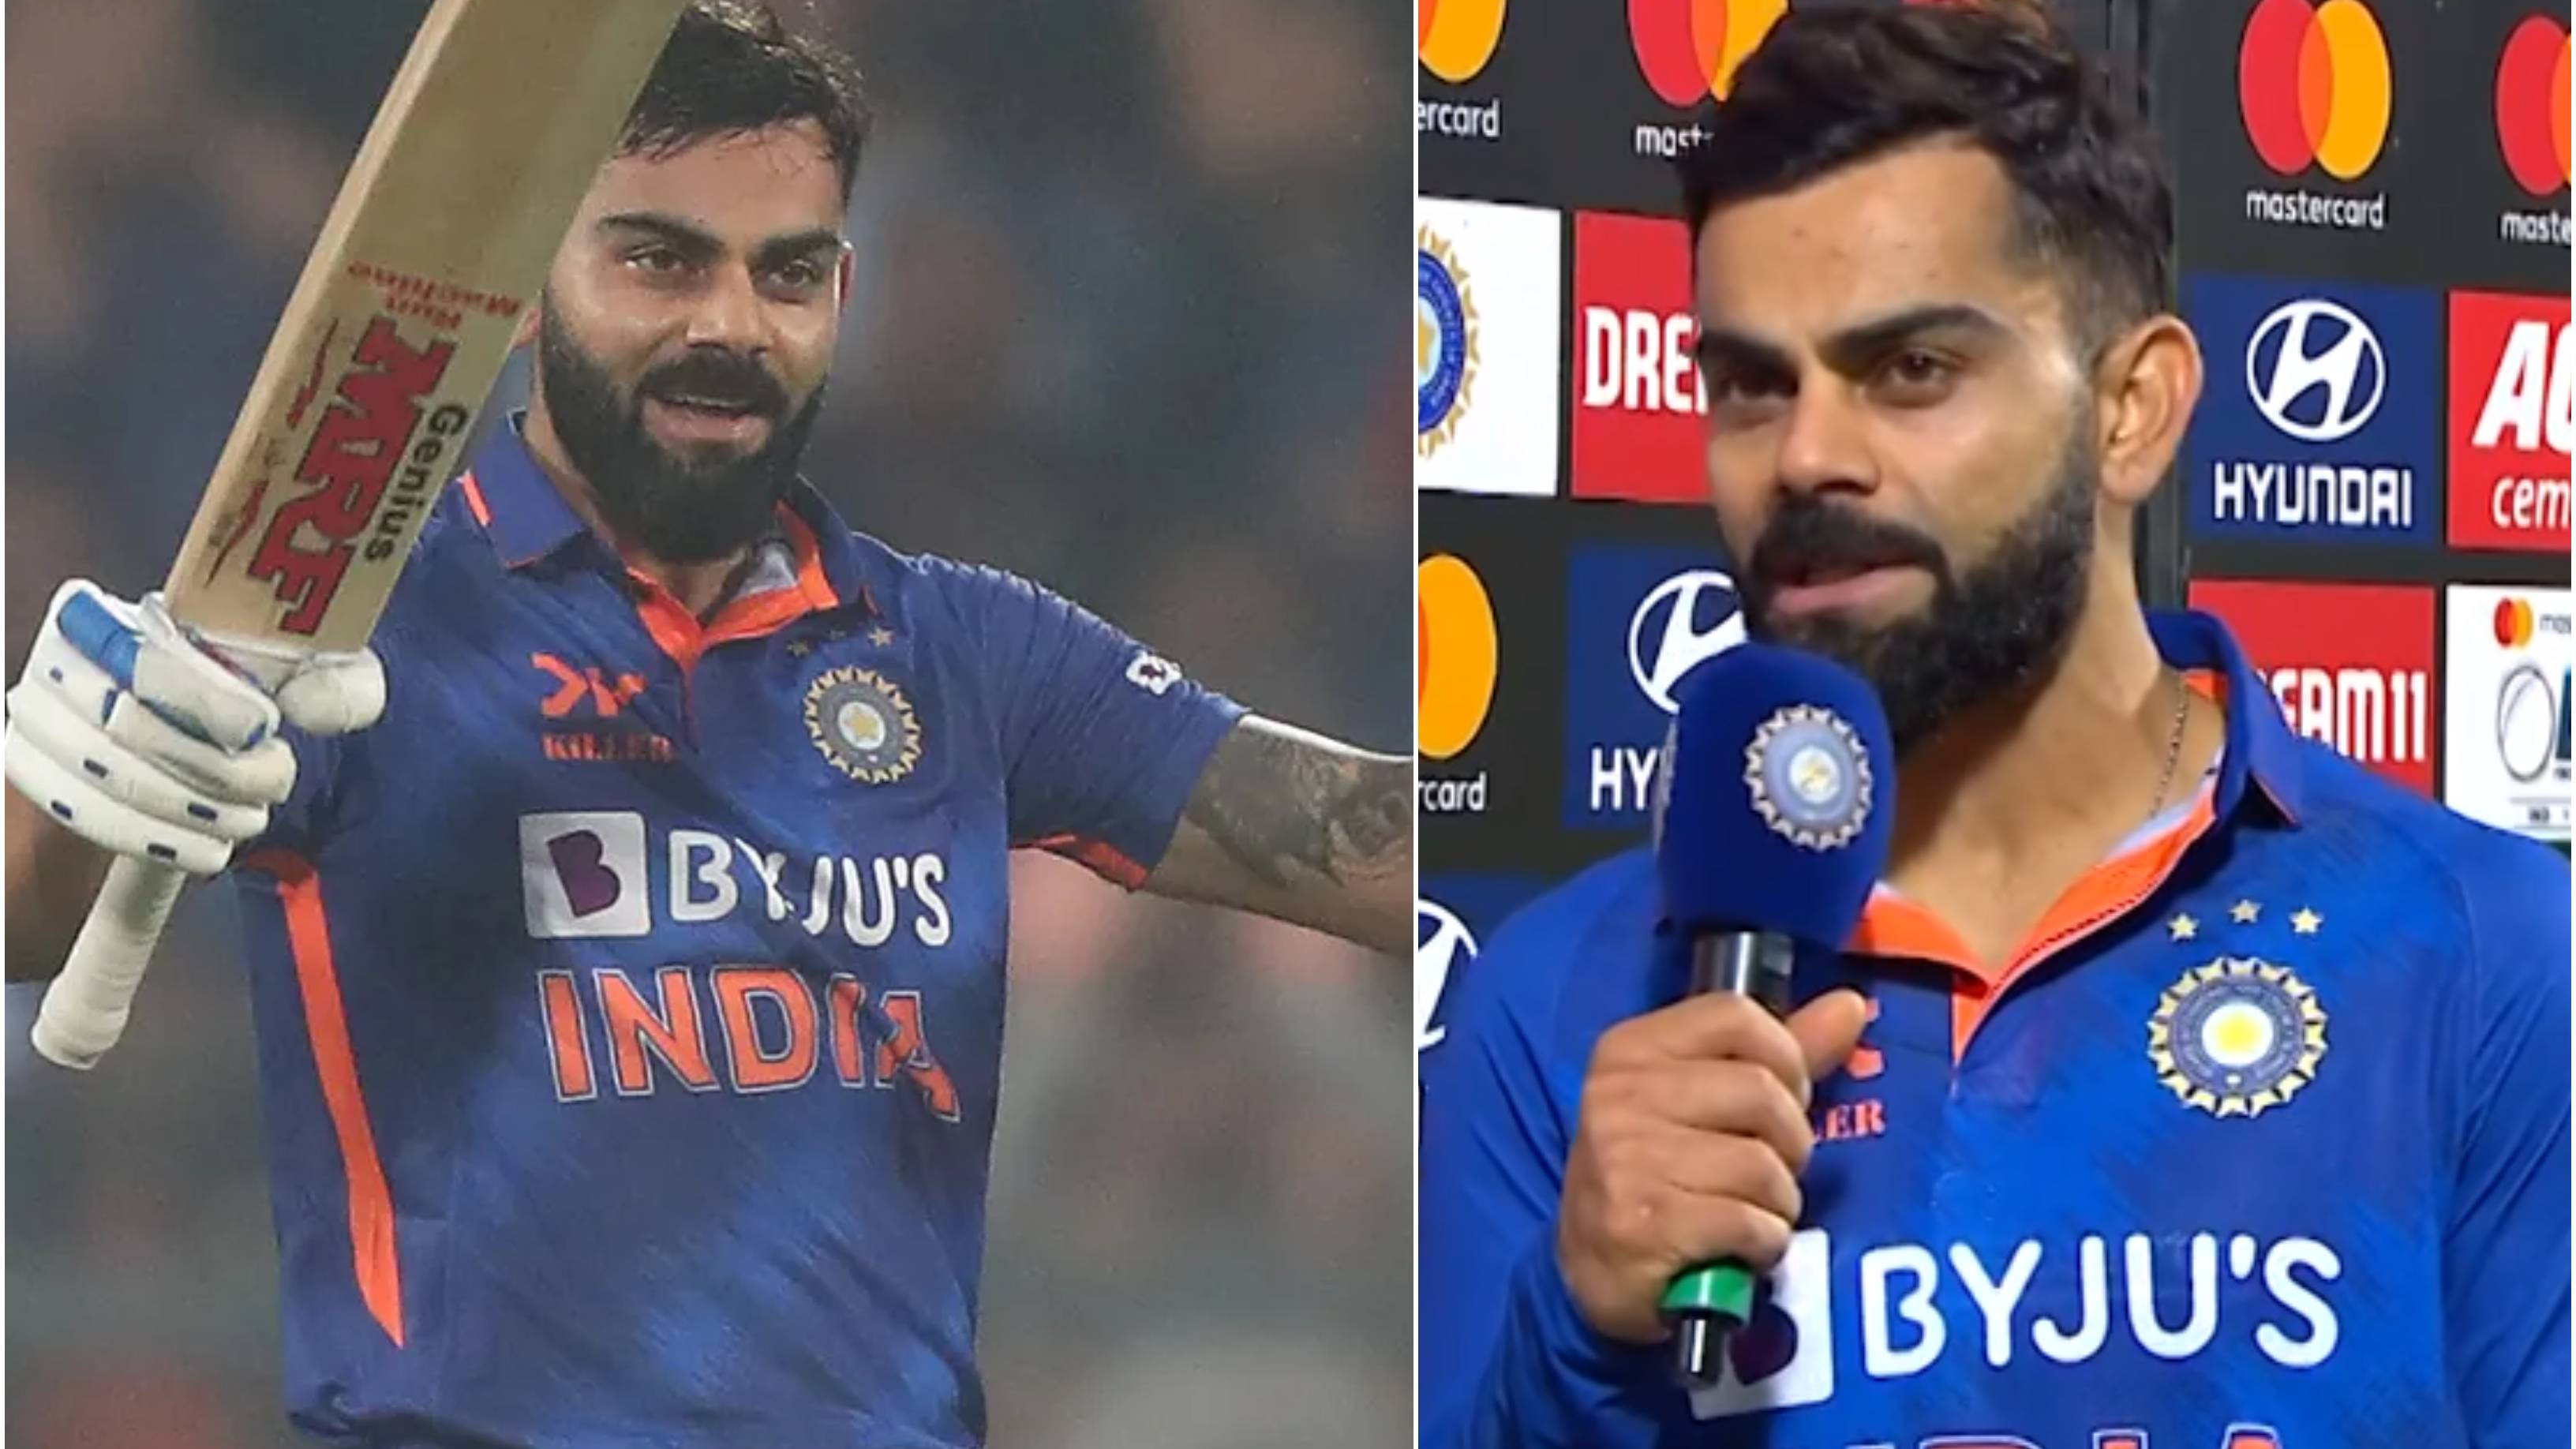 IND v SL 2023: “My preparation and intent always remain same,” says Virat Kohli after his match-winning ton in 1st ODI